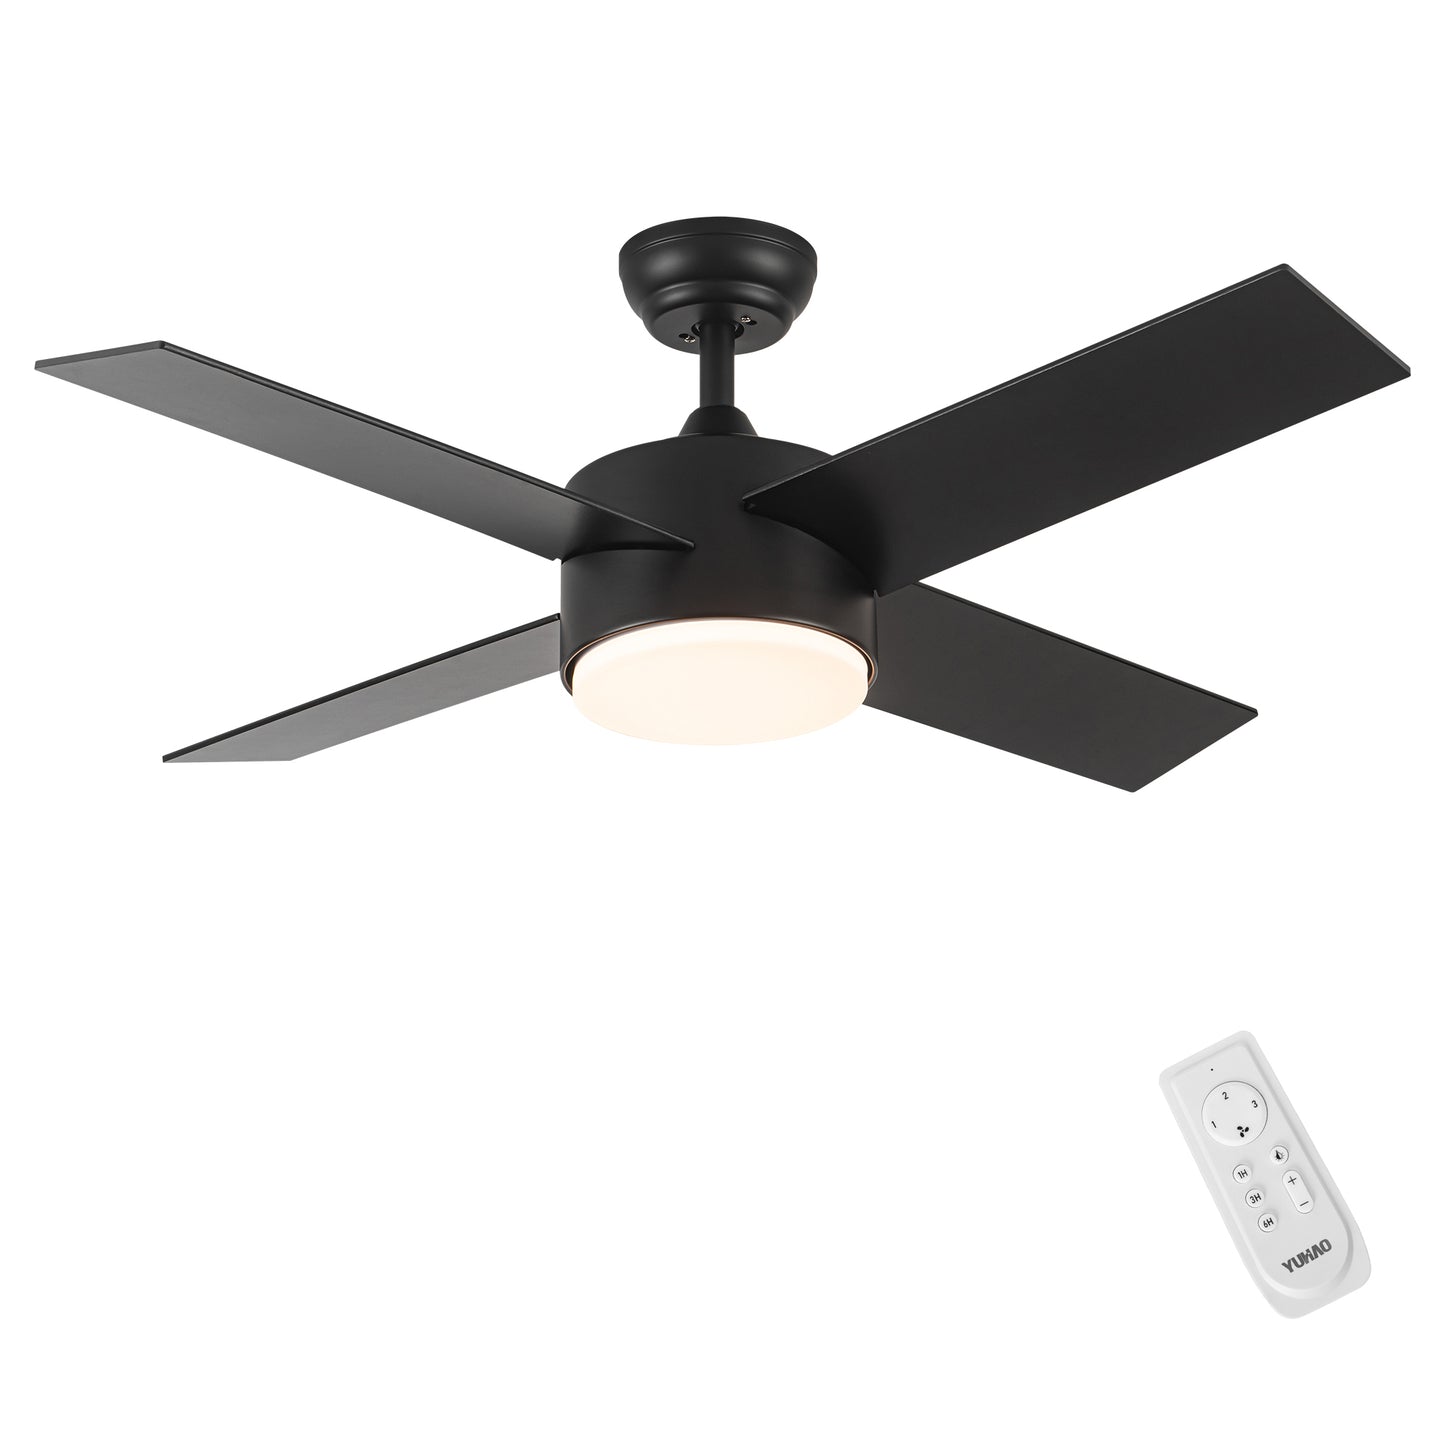 YUHAO 44 Inch LED Ceiling Fan with Black ABS Blade